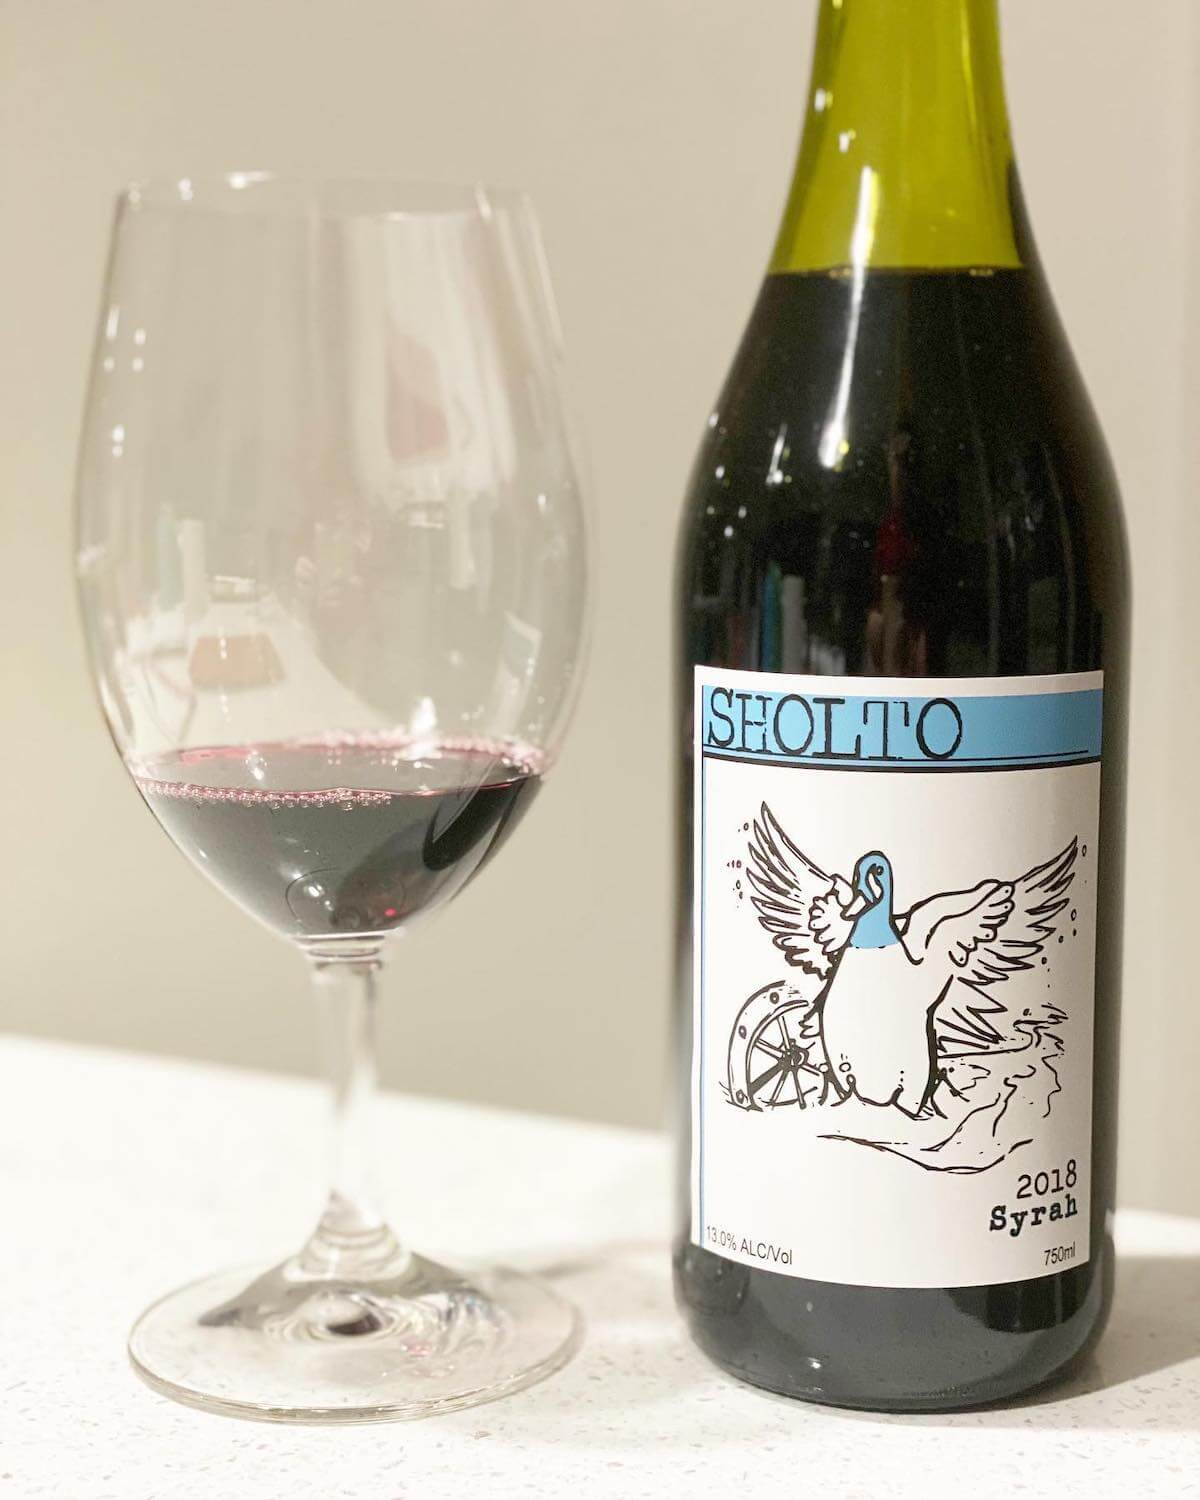 Sholto Wines 2018 Syrah - Canberra